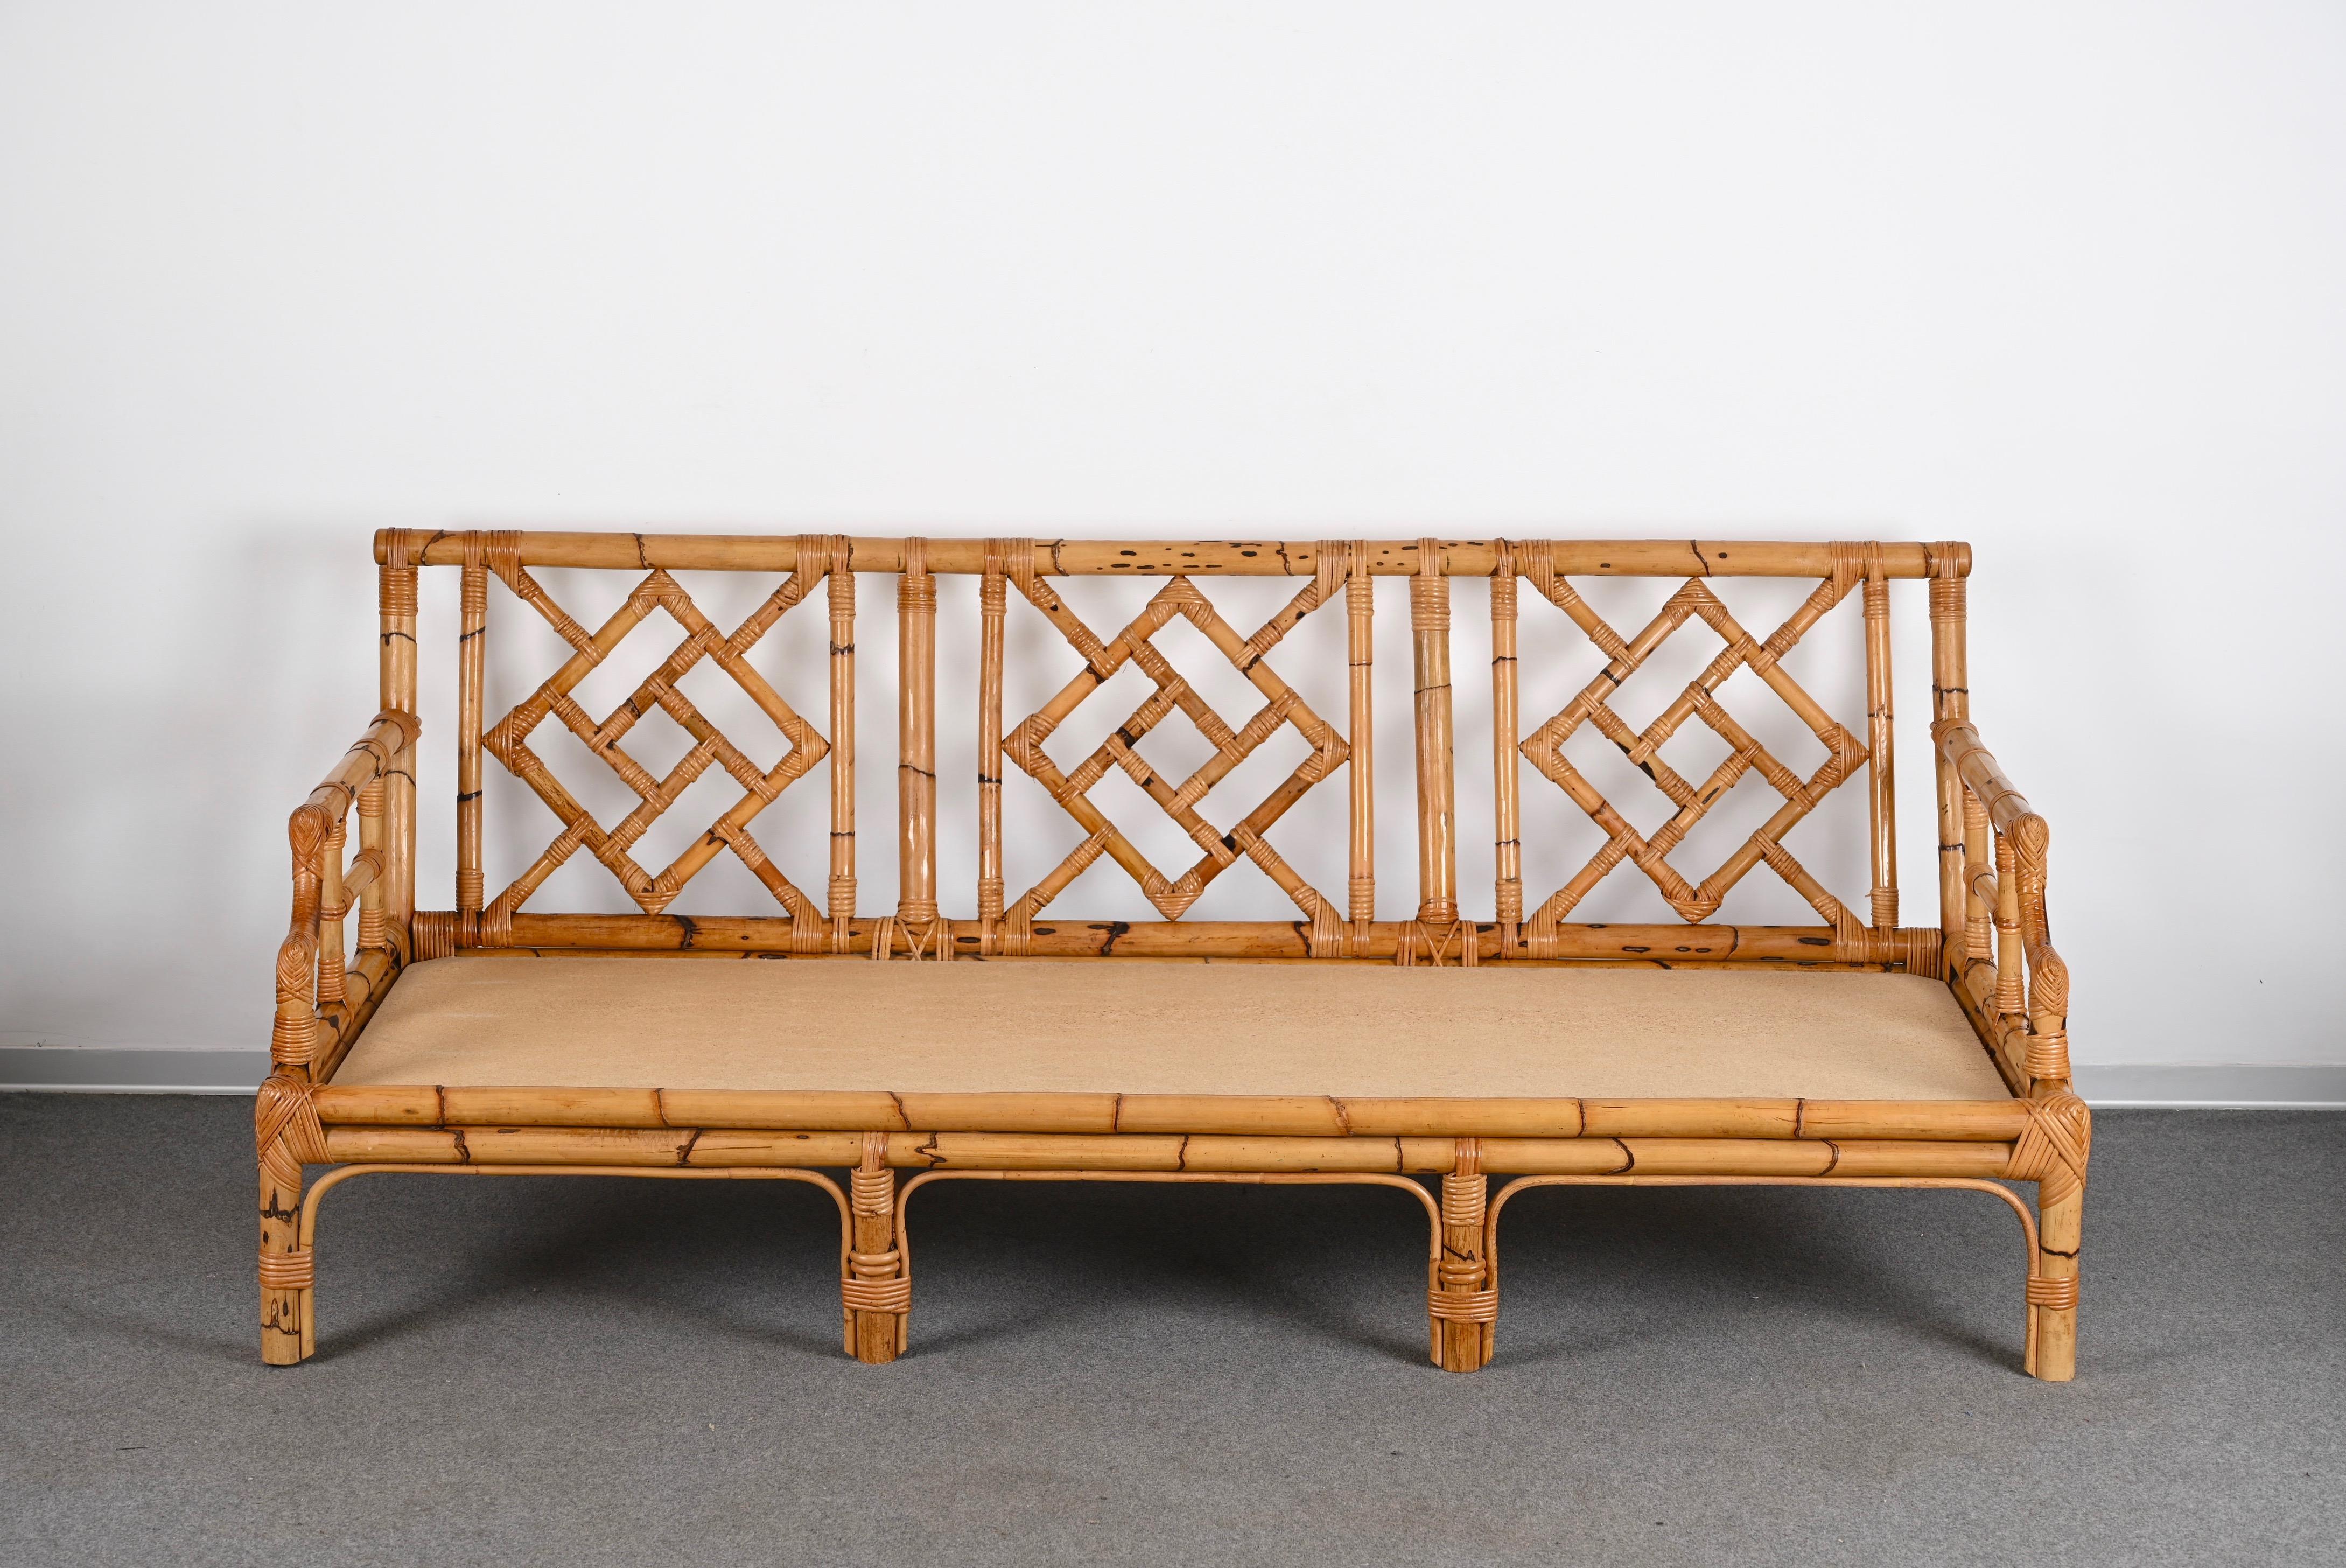 Iconic Mid-Century Modern three-seat sofa in bamboo and rattan. This amazing piece was produced by Vivai del Sud in Italy during 1970s. 

This wonderful hand-crafted sofa has a structure in curved bamboo and woven rattan with beautiful